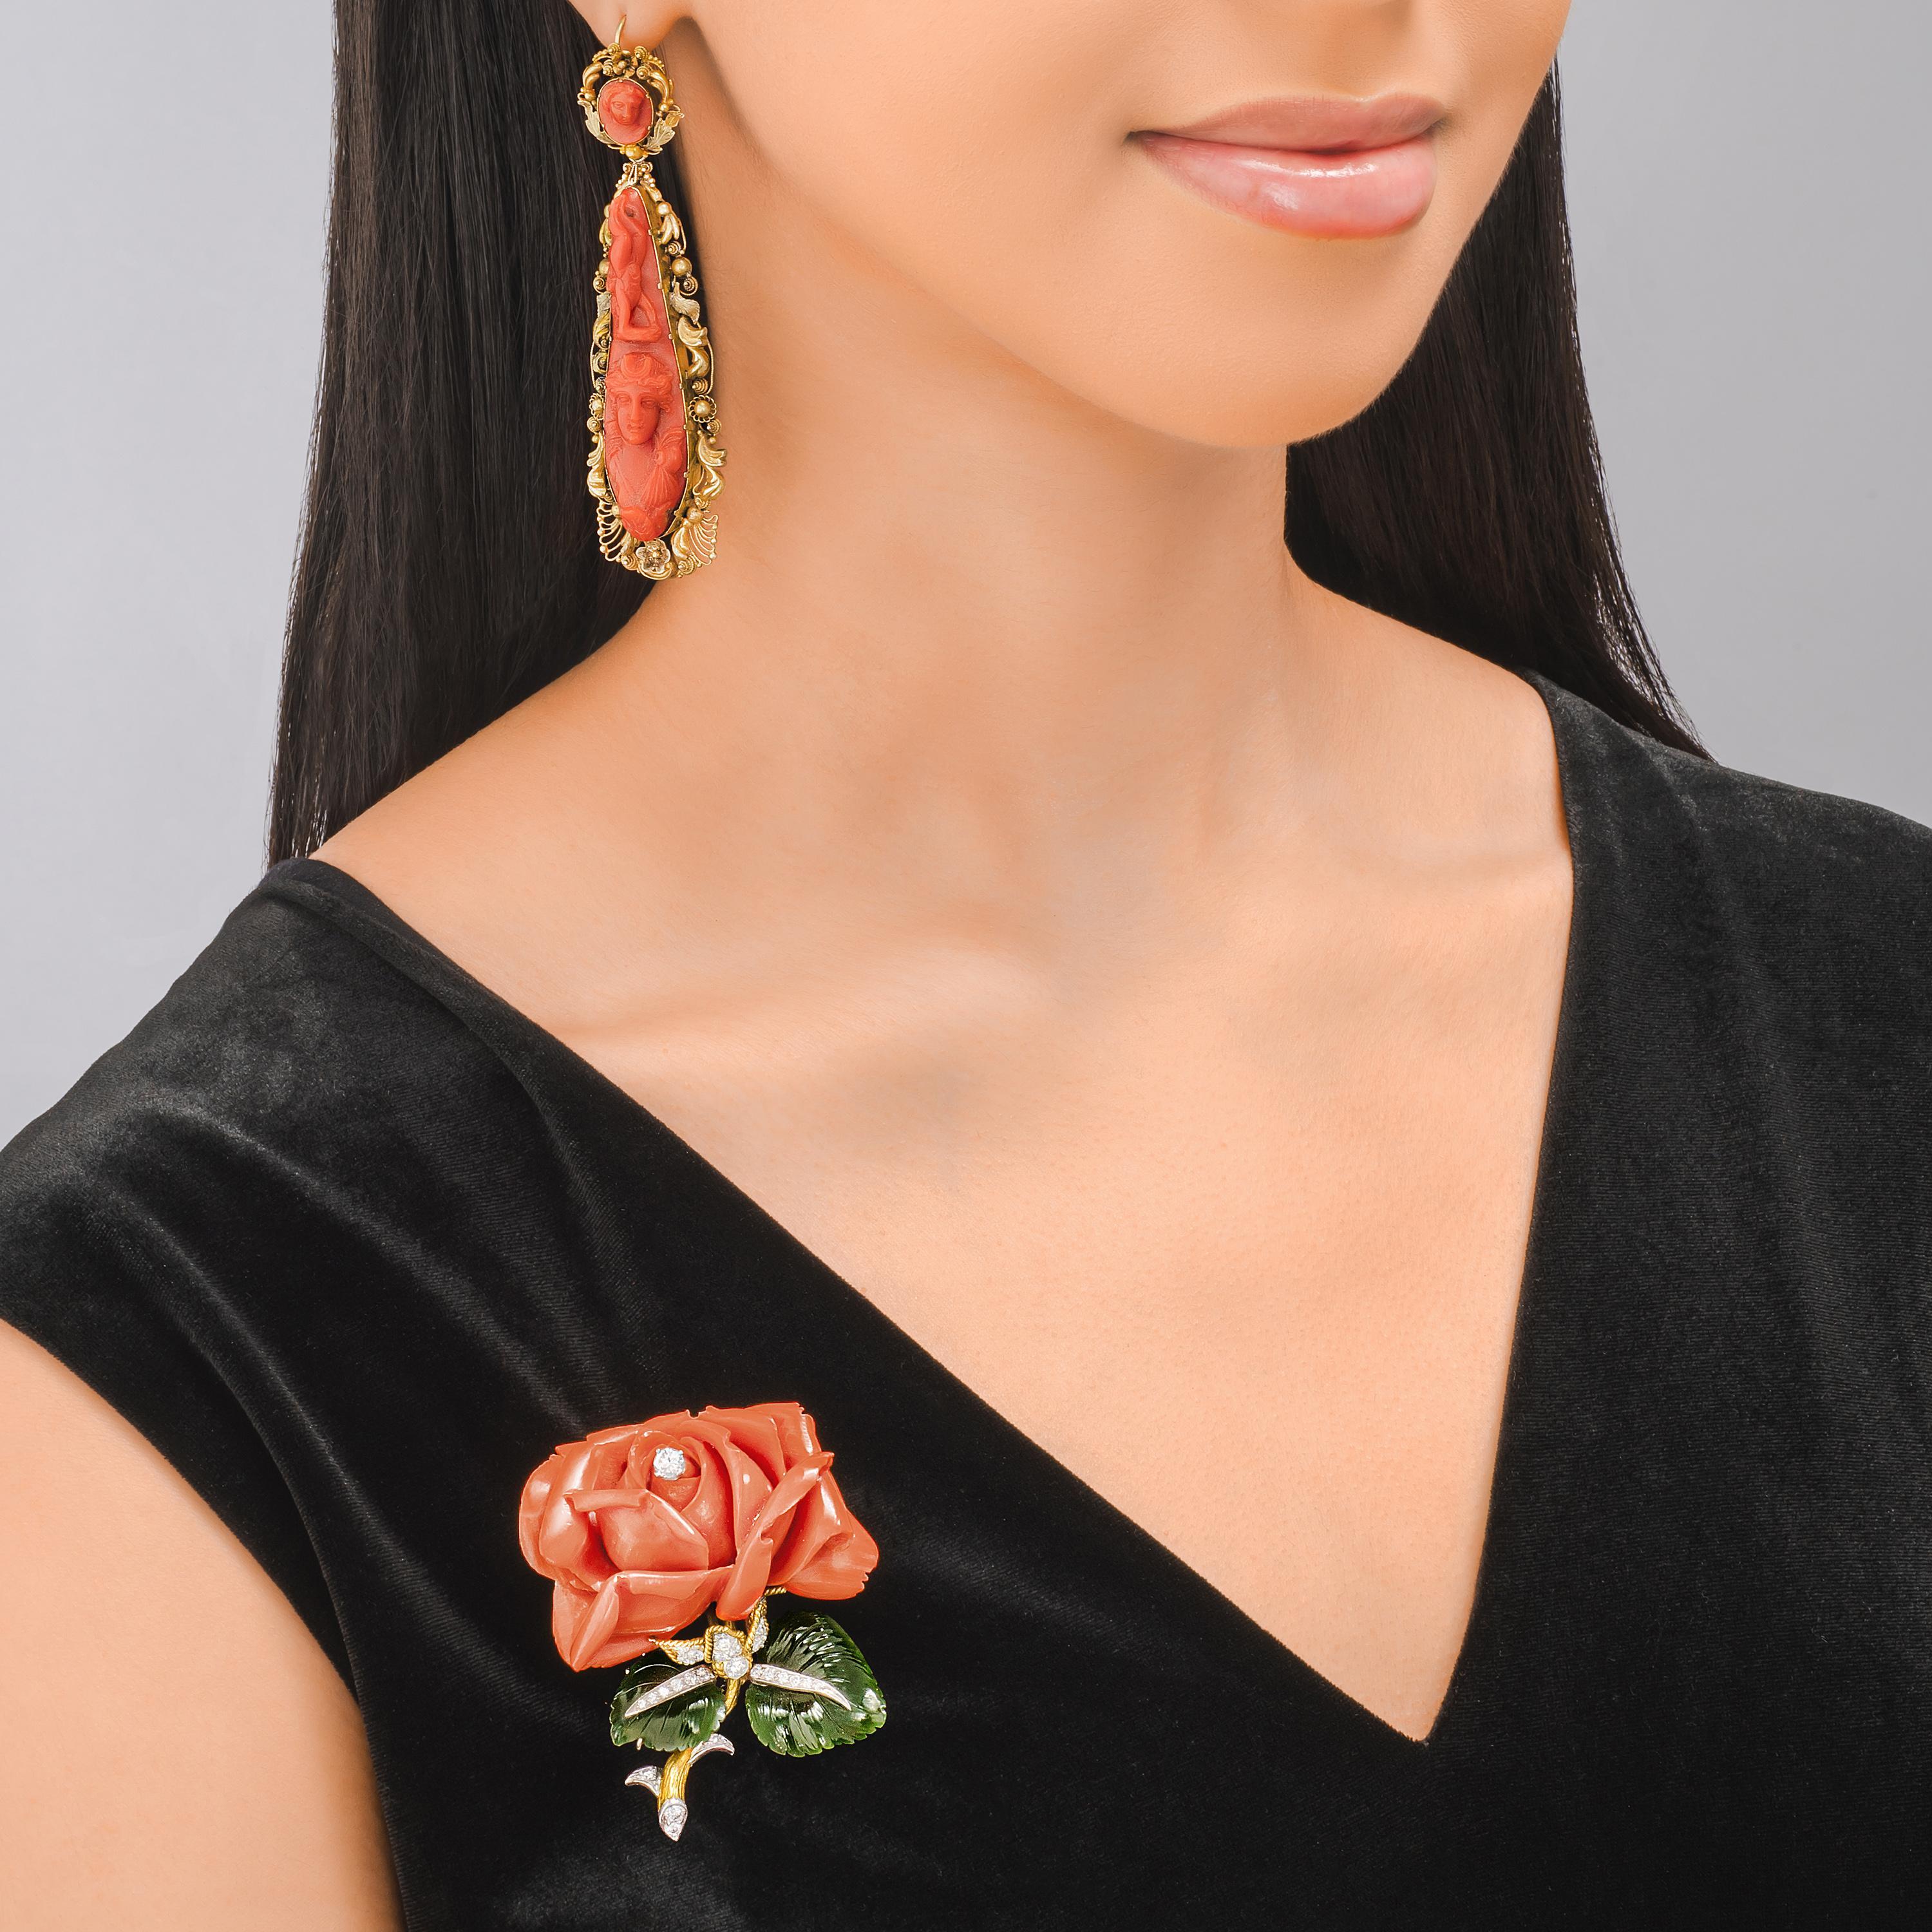 ANTIQUE CORAL EARRINGS Summary